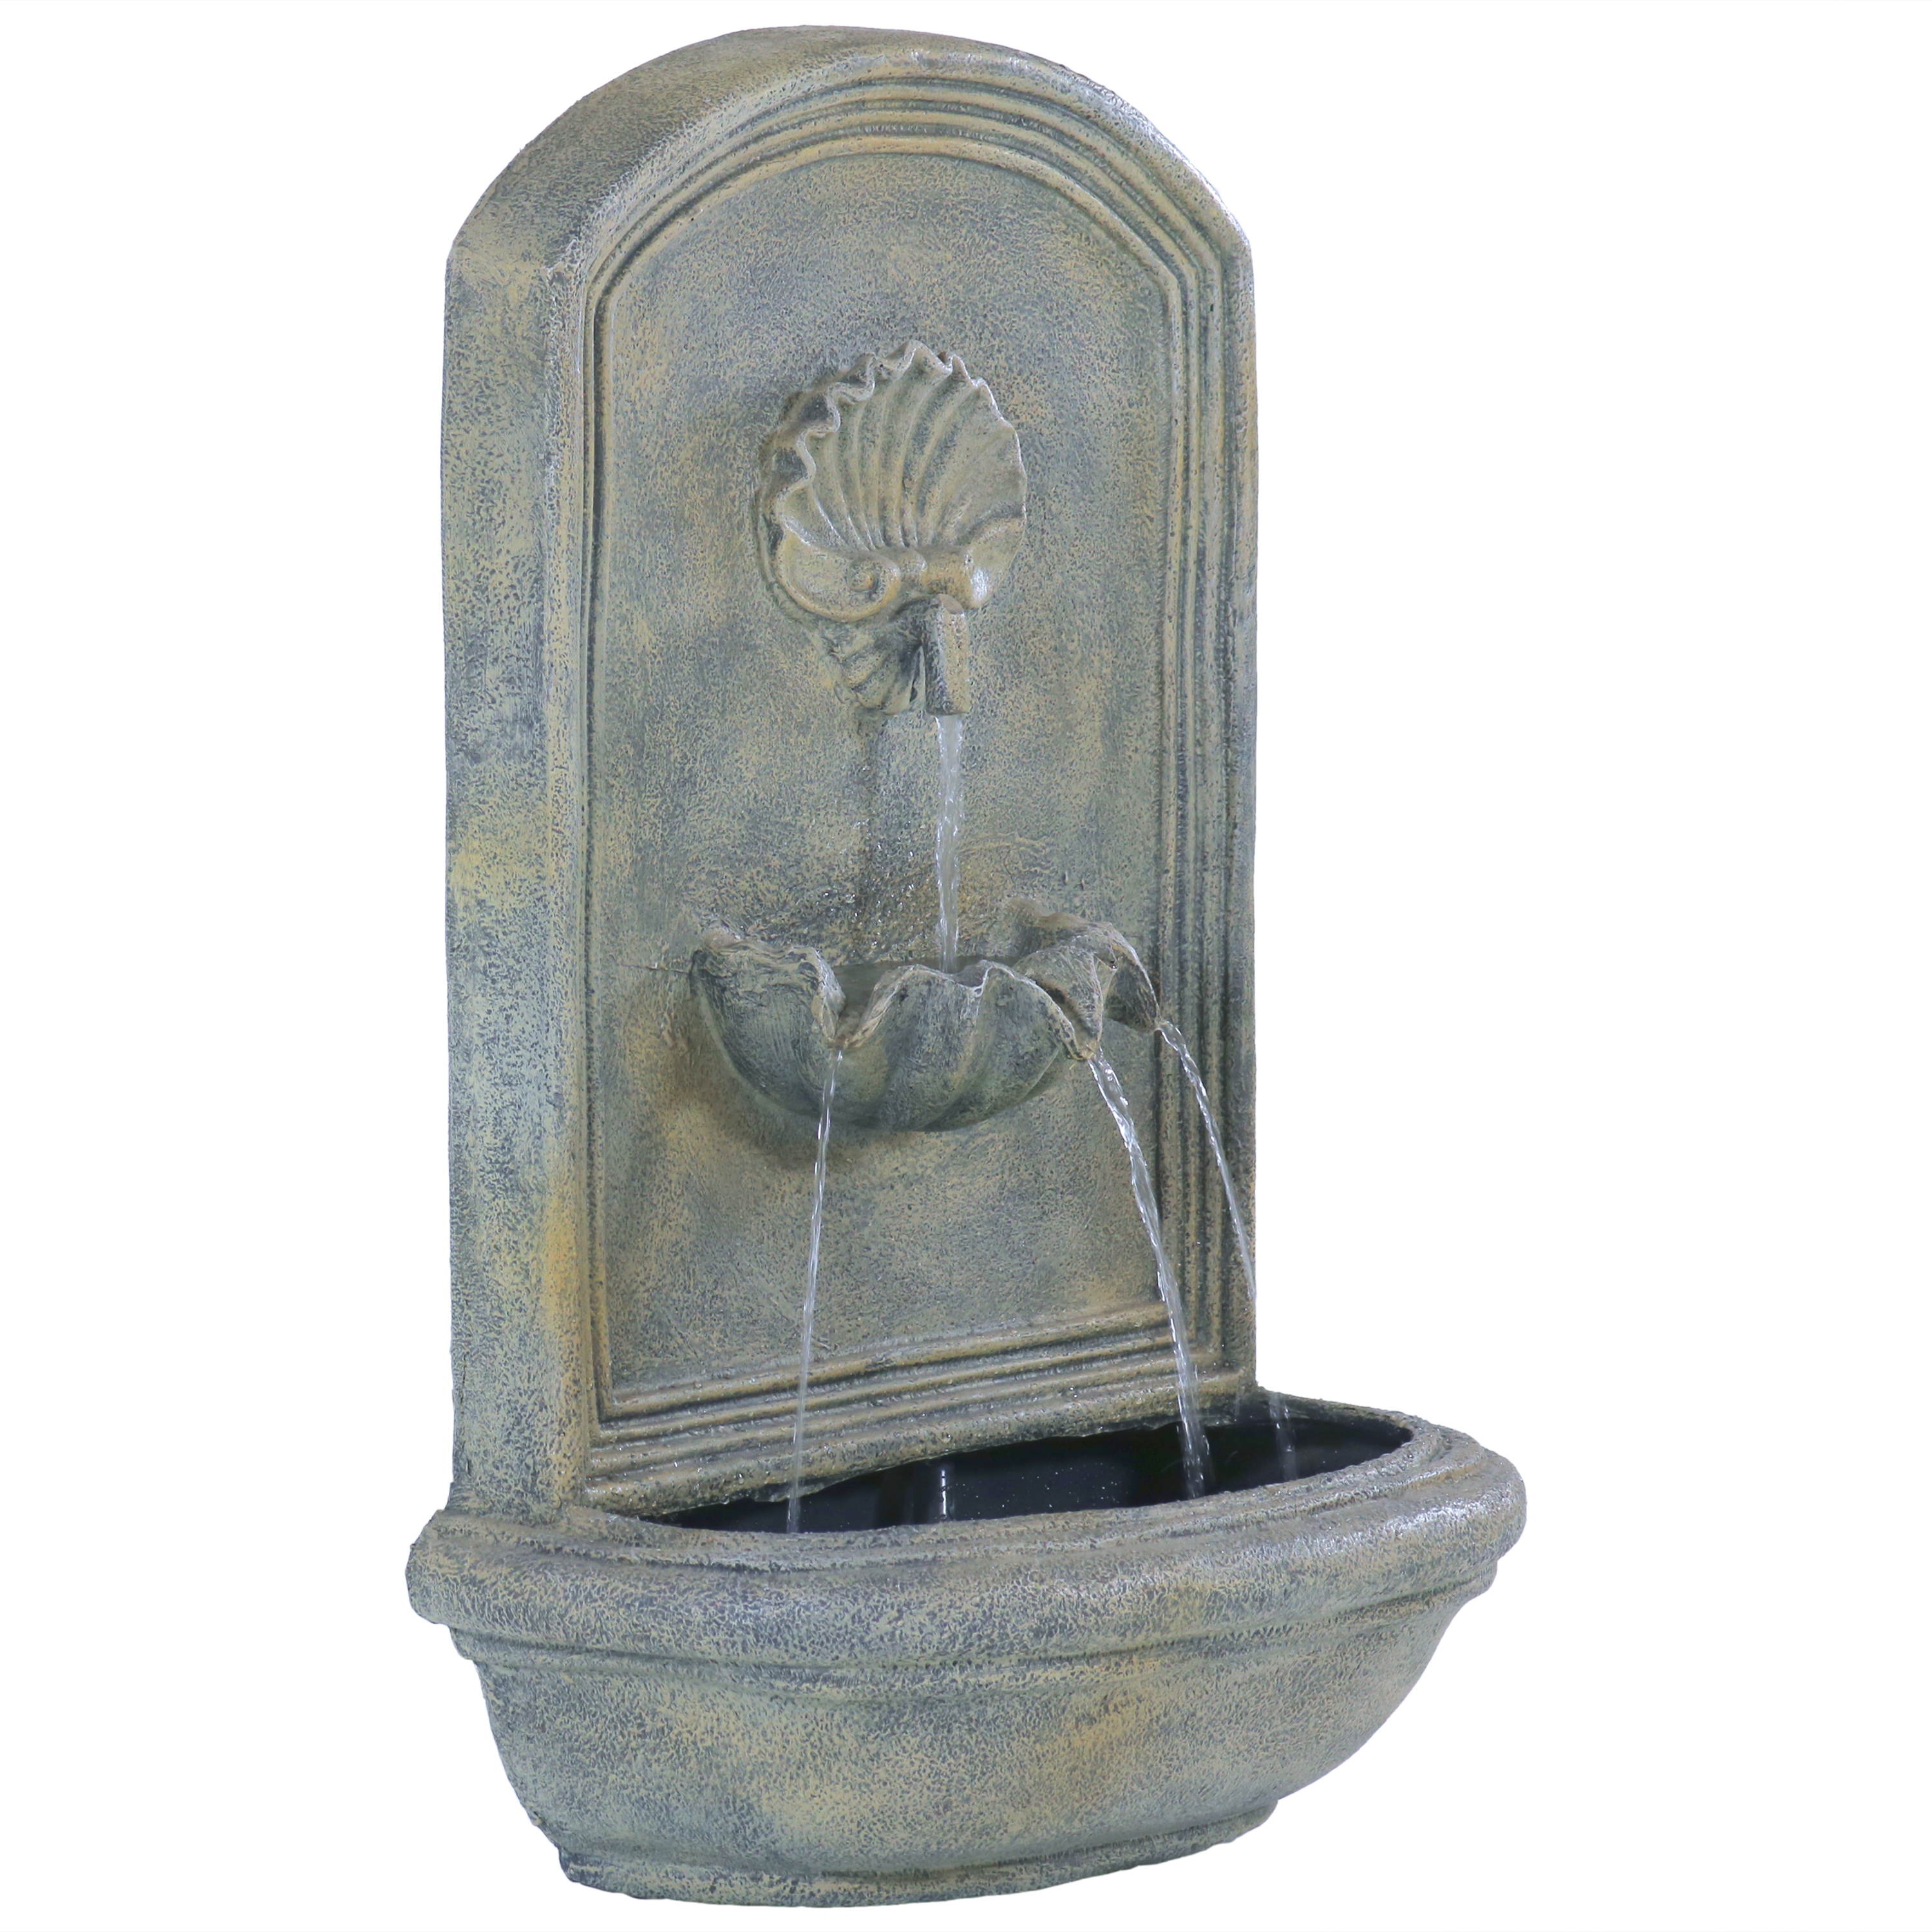 Sunnydaze Seaside Outdoor Wall Fountain, with Electric Submersible Pump 27-Inch Tall, Limestone